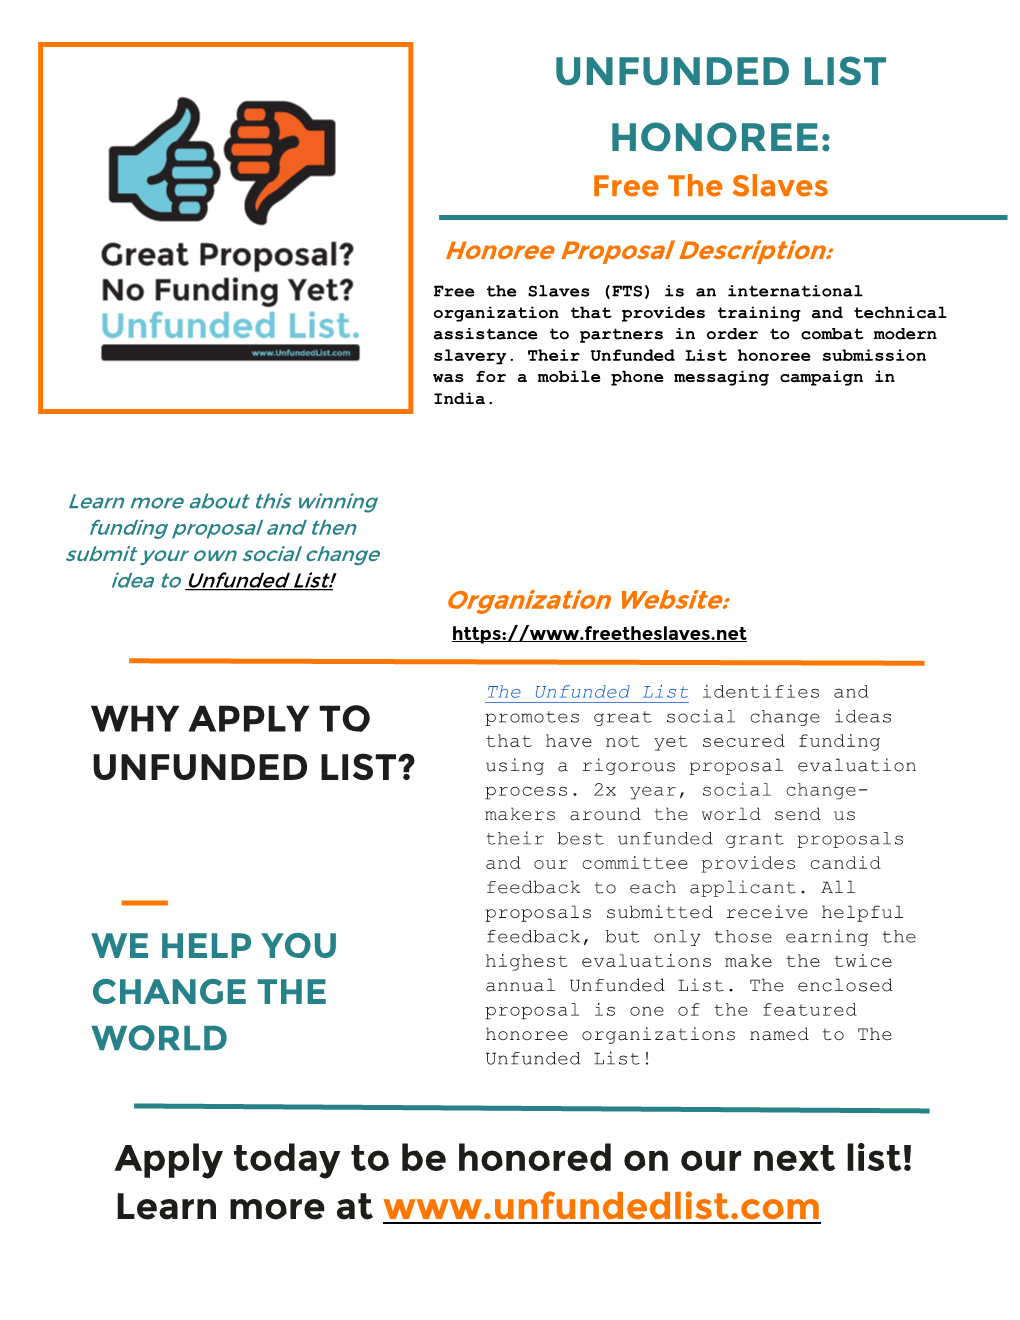 Unfunded List 2016 Honoree Proposal Free the Slaves